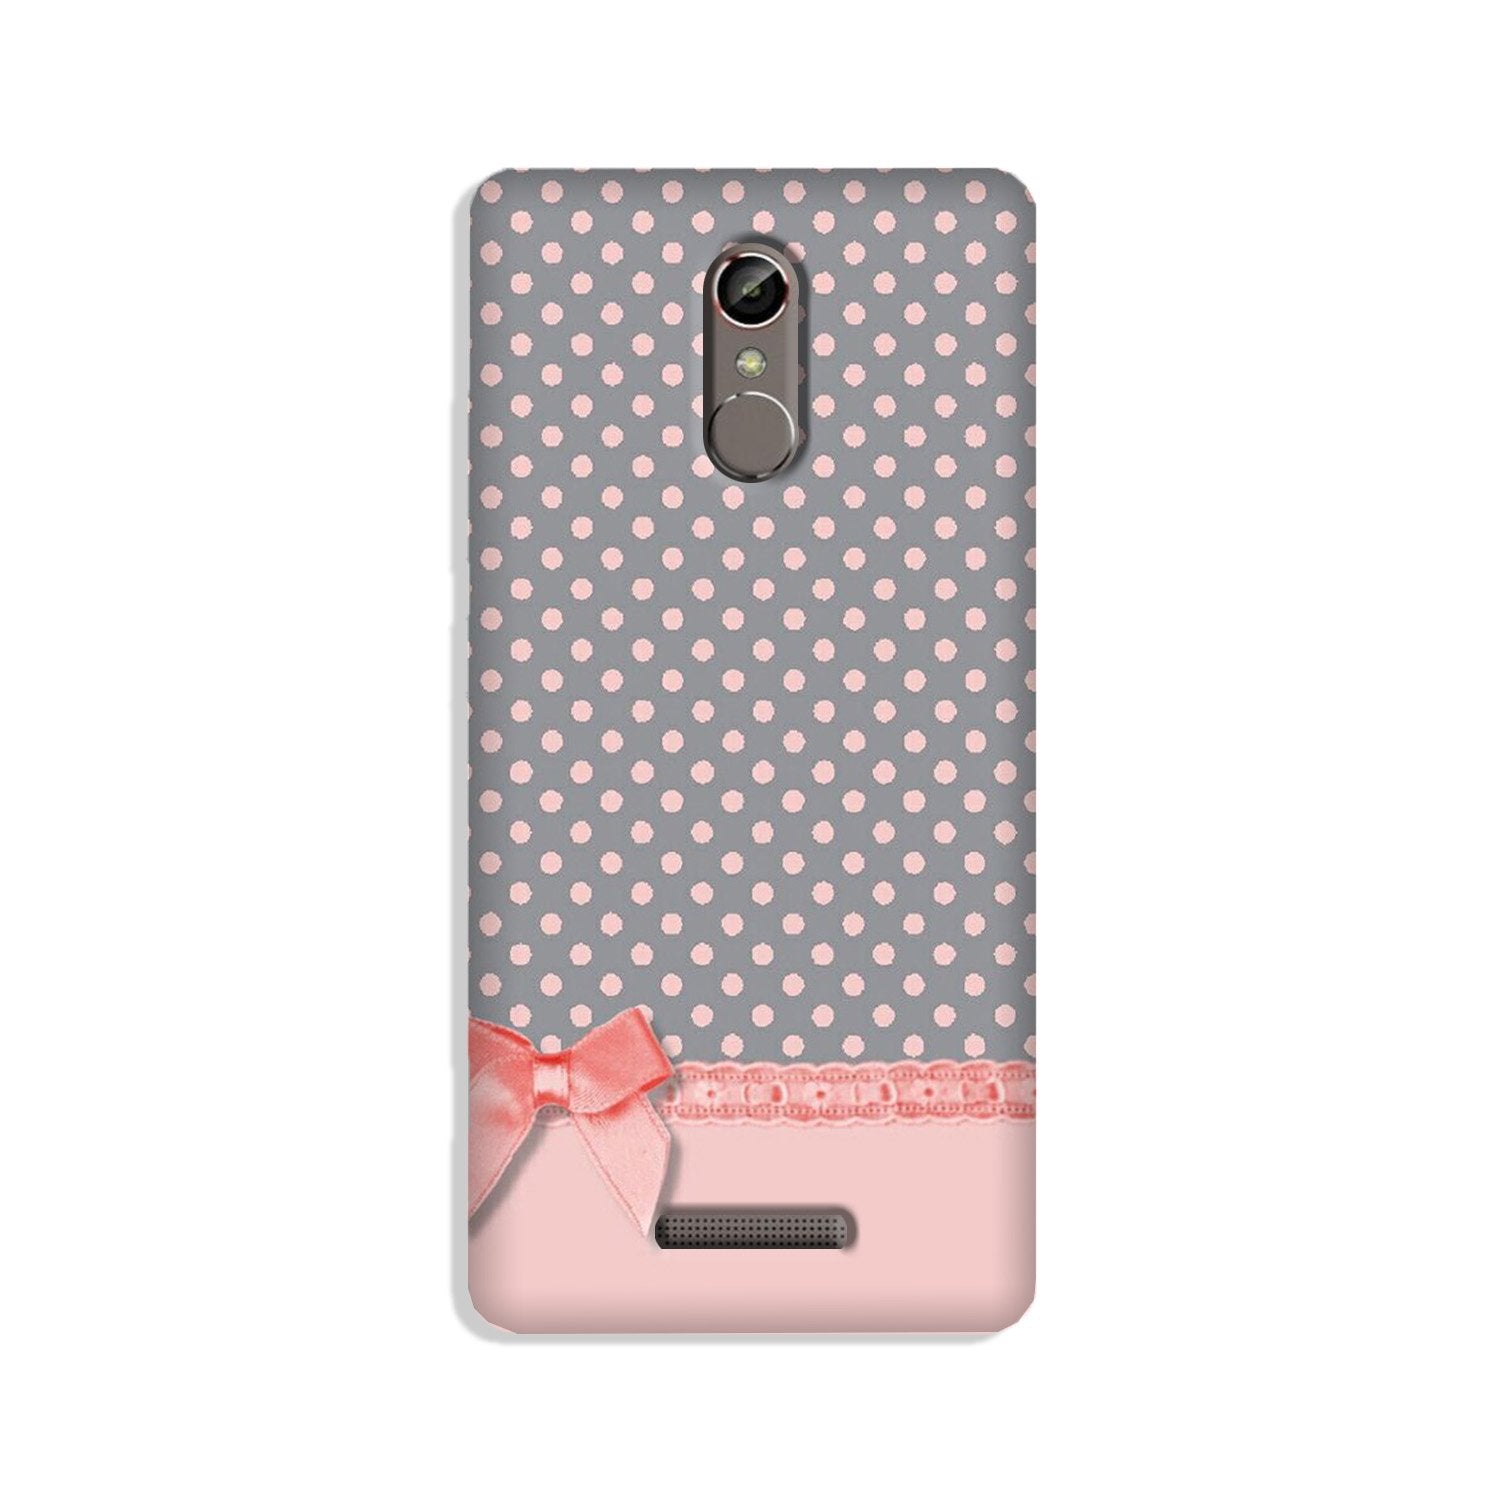 Gift Wrap2 Case for Redmi Note 3